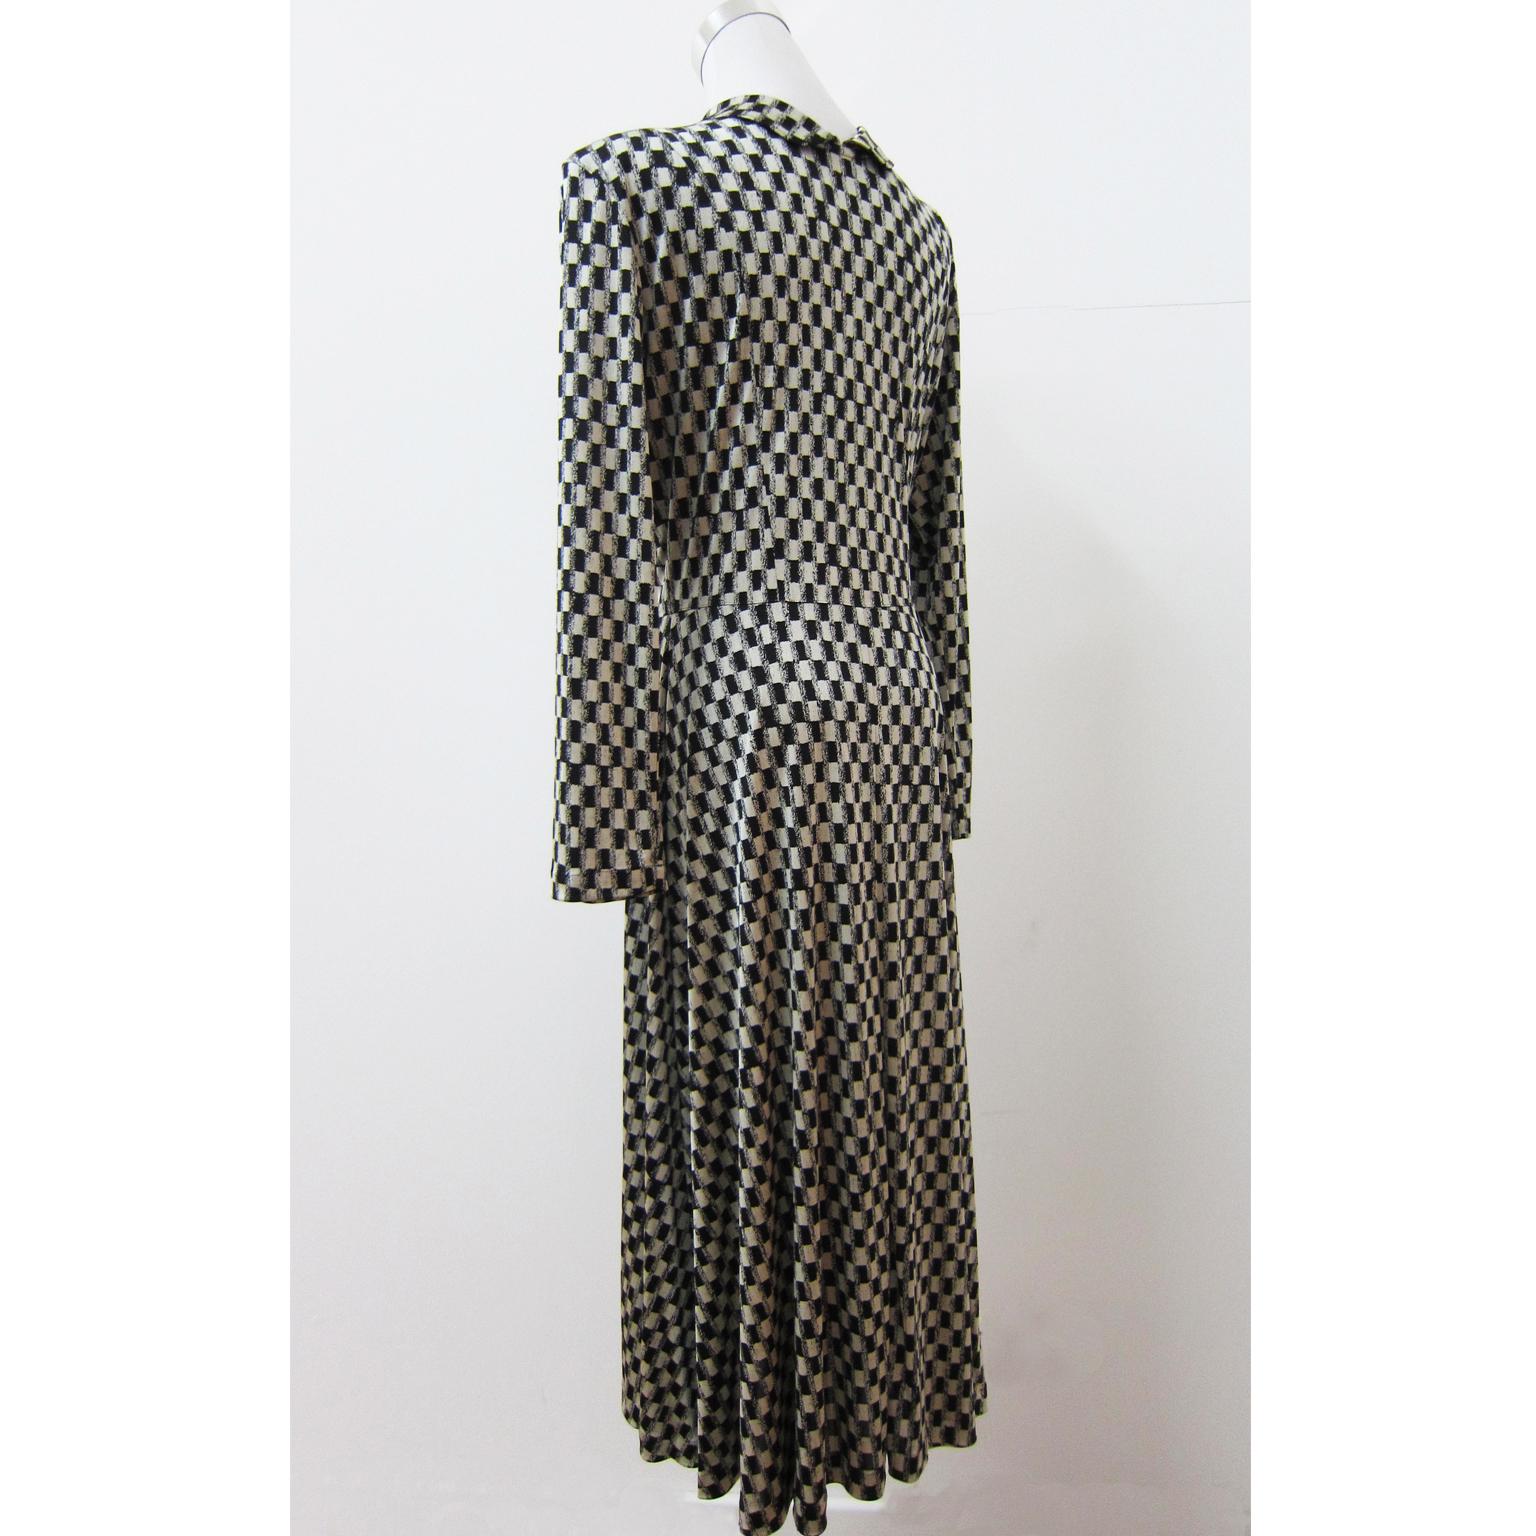 Comme des Garcons Tricot Black White Dress Coat Early 1980s  In Good Condition For Sale In Berlin, DE